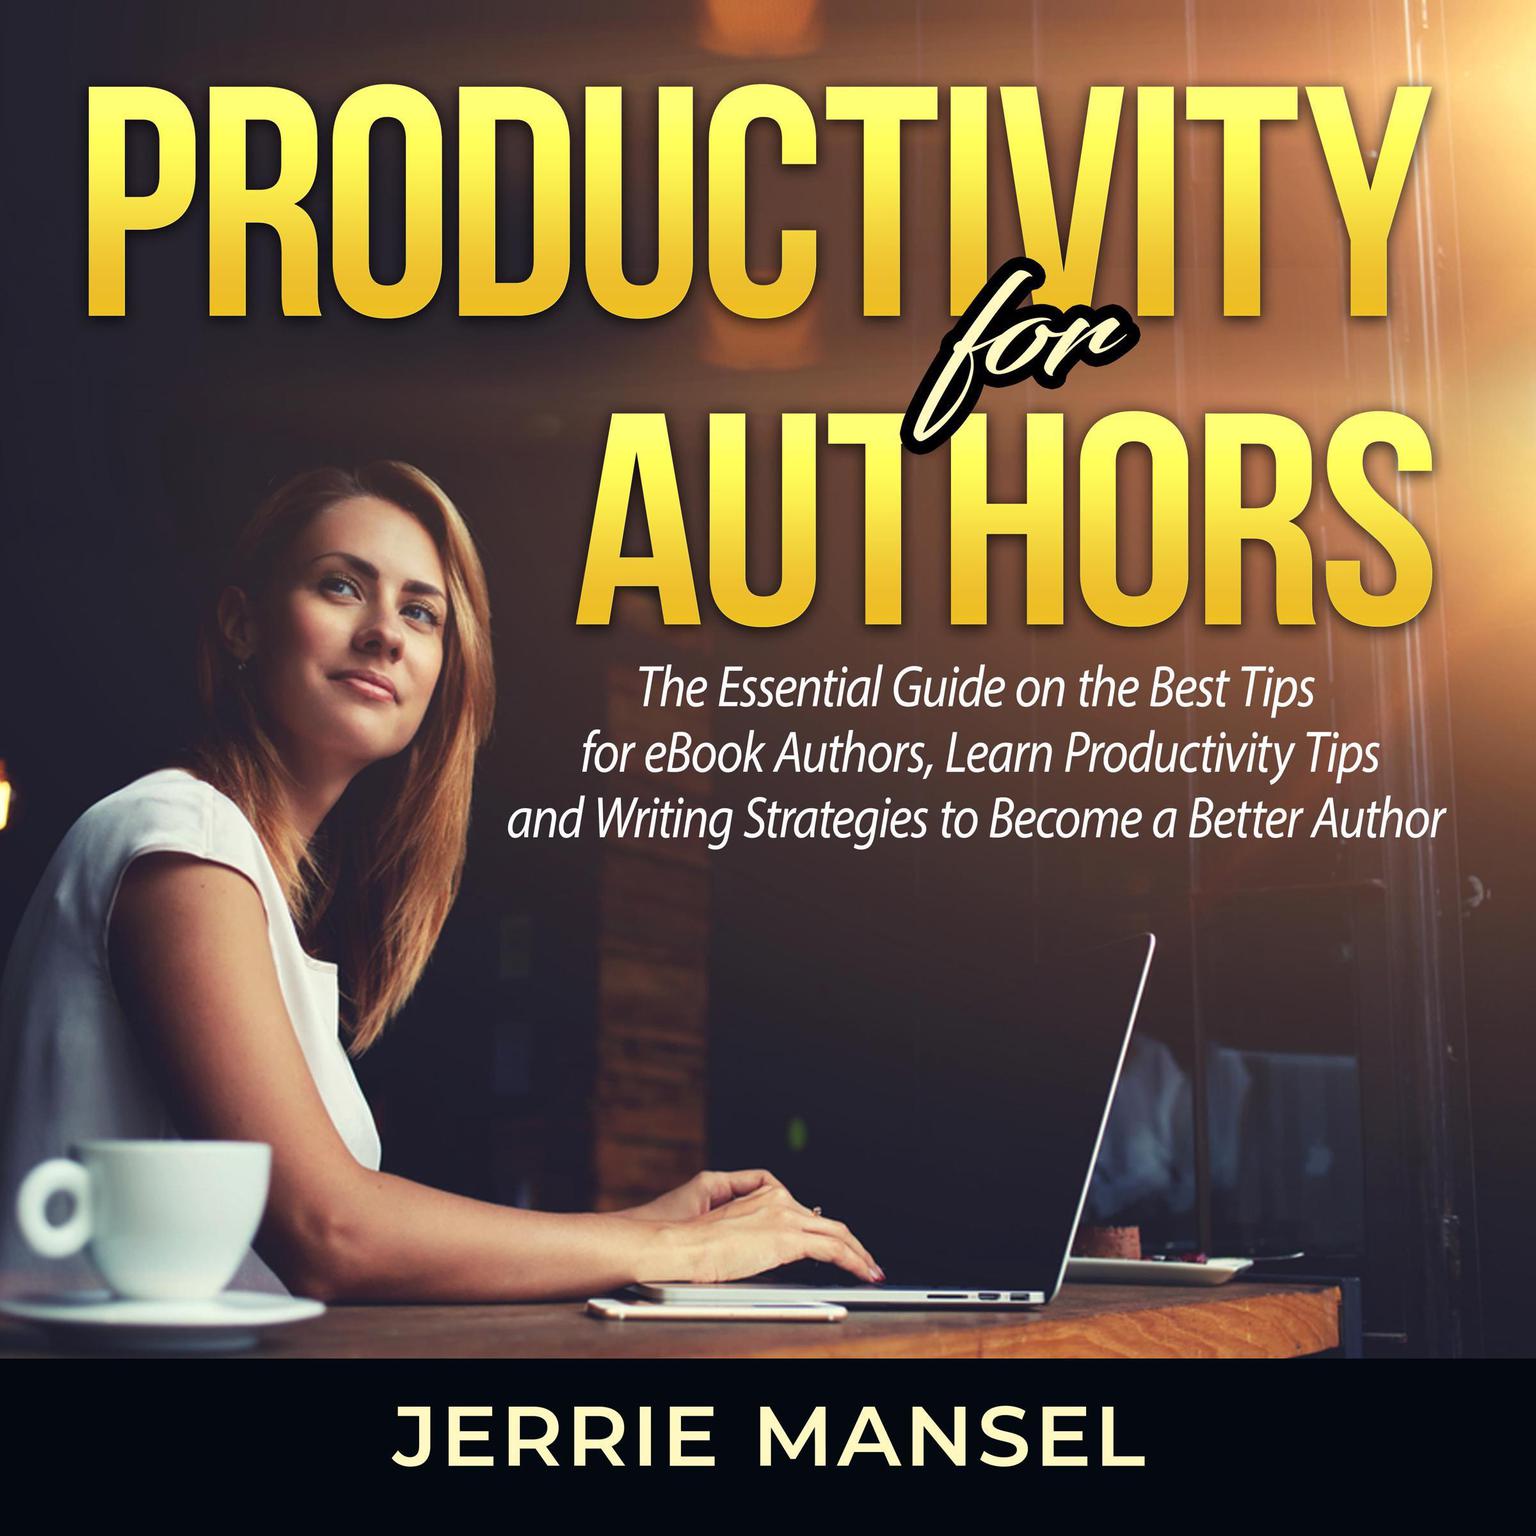 Productivity for Authors: The Essential Guide on the Best Tips for eBook Authors, Learn Productivity Tips and Writing Strategies to Become a Better Author Audiobook, by Jerrie Mansel